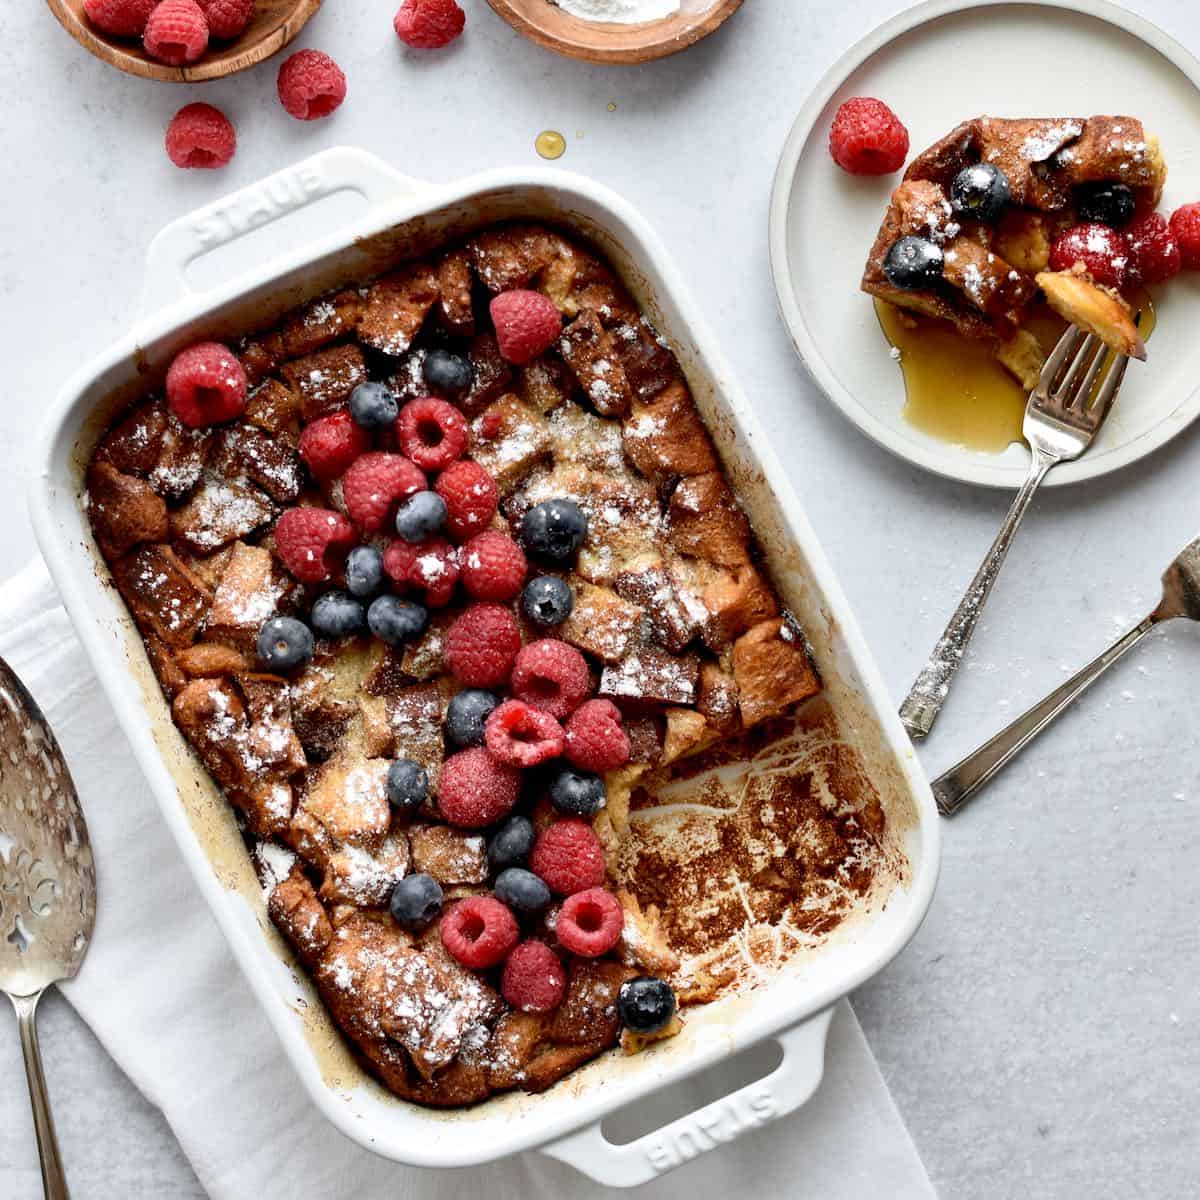 A white casserole dish with french toast casserole sprinkled with powdered sugar and fresh berries. A plate next to the dish has one serving of french toast casserole with maple syrup, and two forks and a serving spoon are to the side.